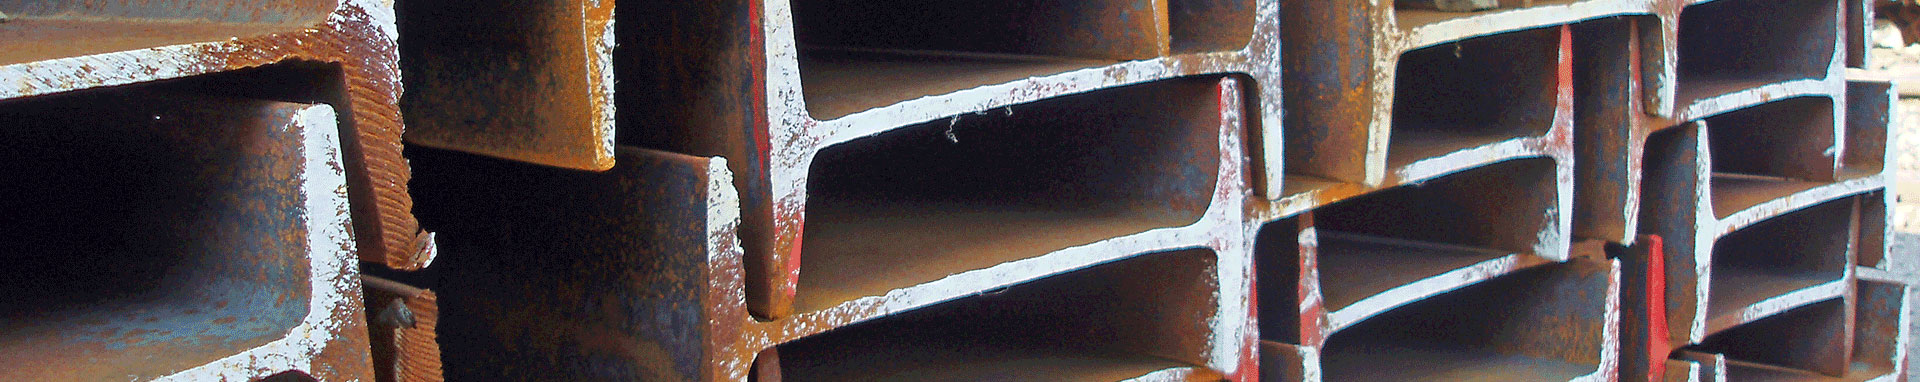 stacked steel i-beams